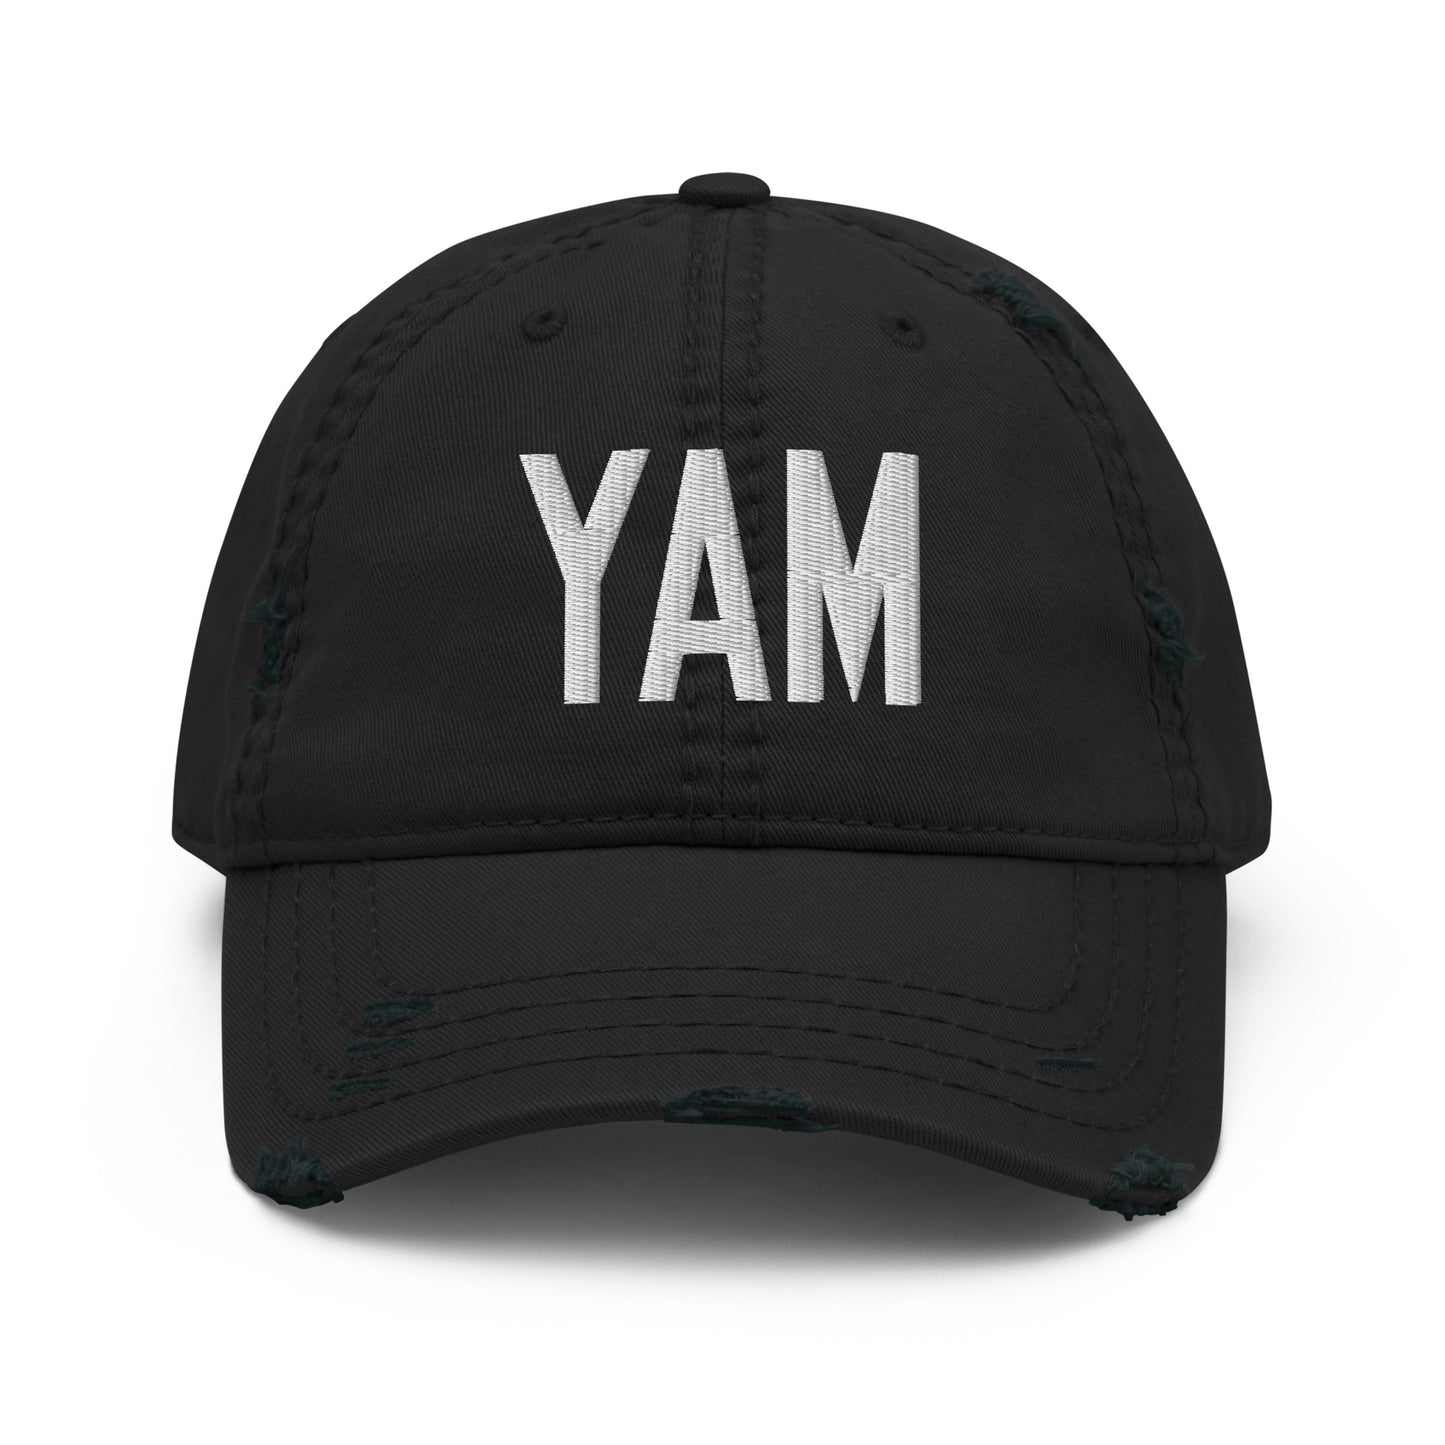 Airport Code Distressed Hat - White • YAM Sault-Ste-Marie • YHM Designs - Image 10